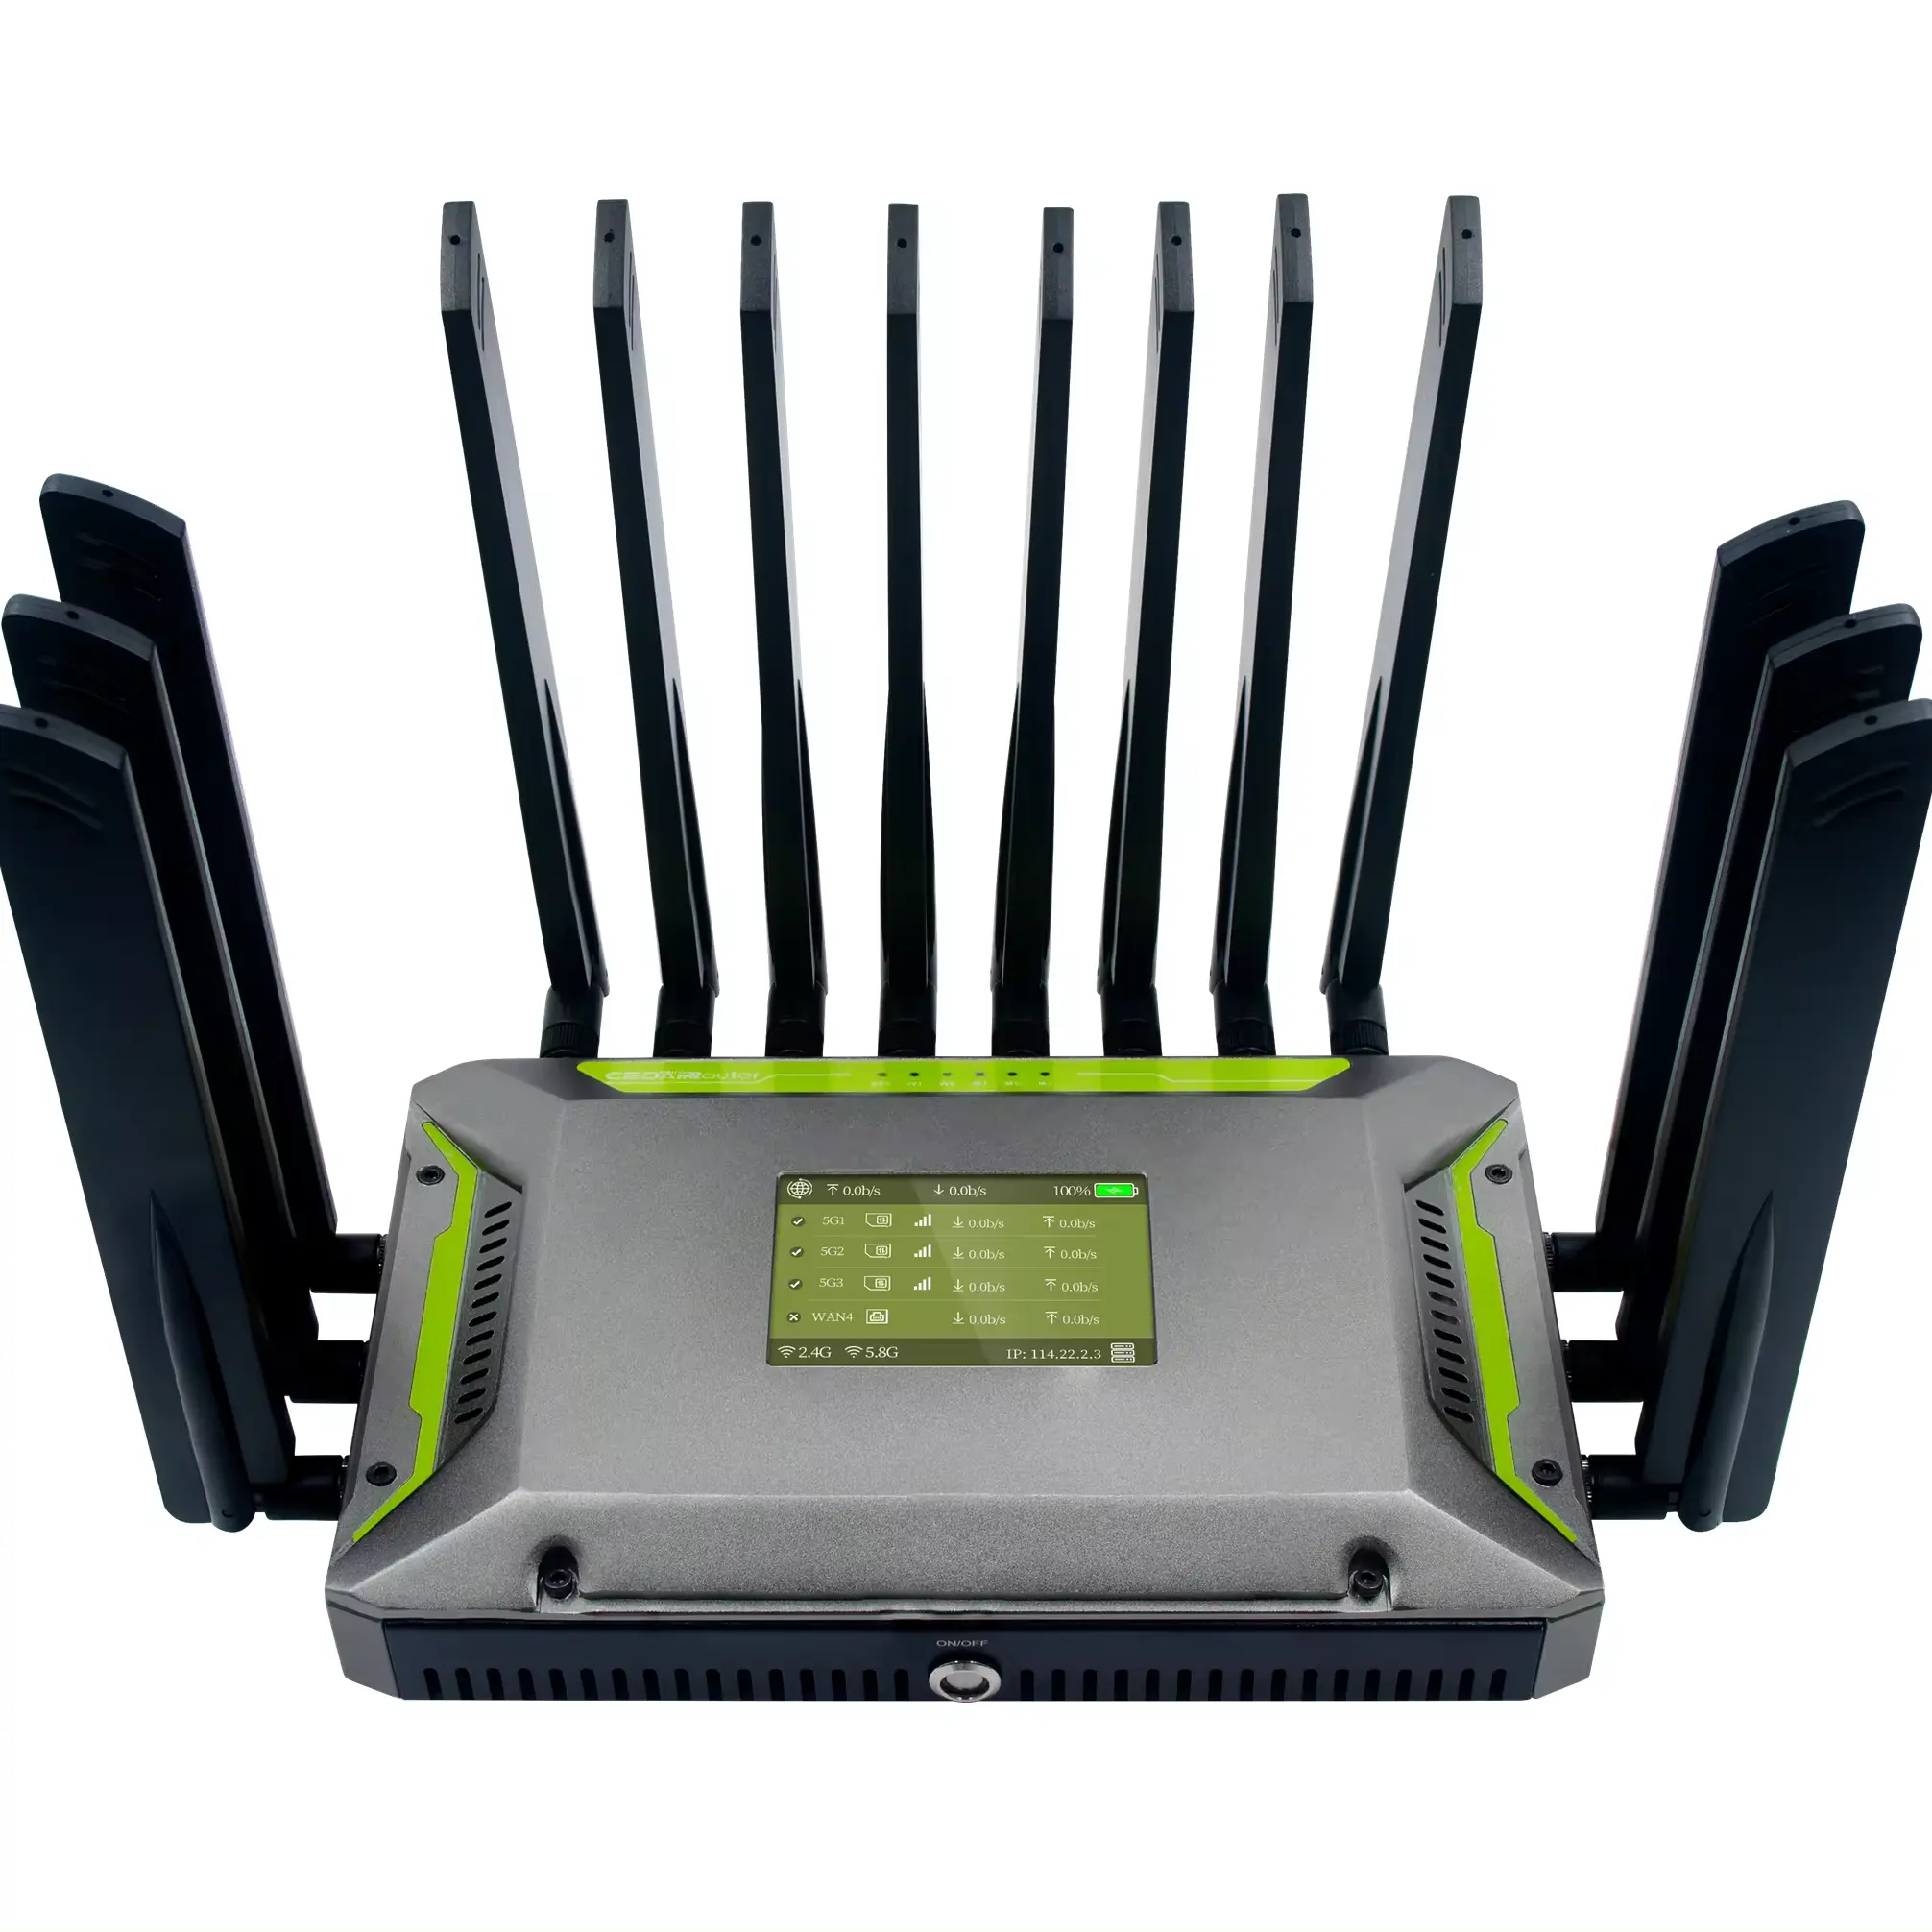 Cedar Router C3 5G 4G Cellular Router Support UDP TCP Bonding Mobile Router Offer Internet for Different Devices